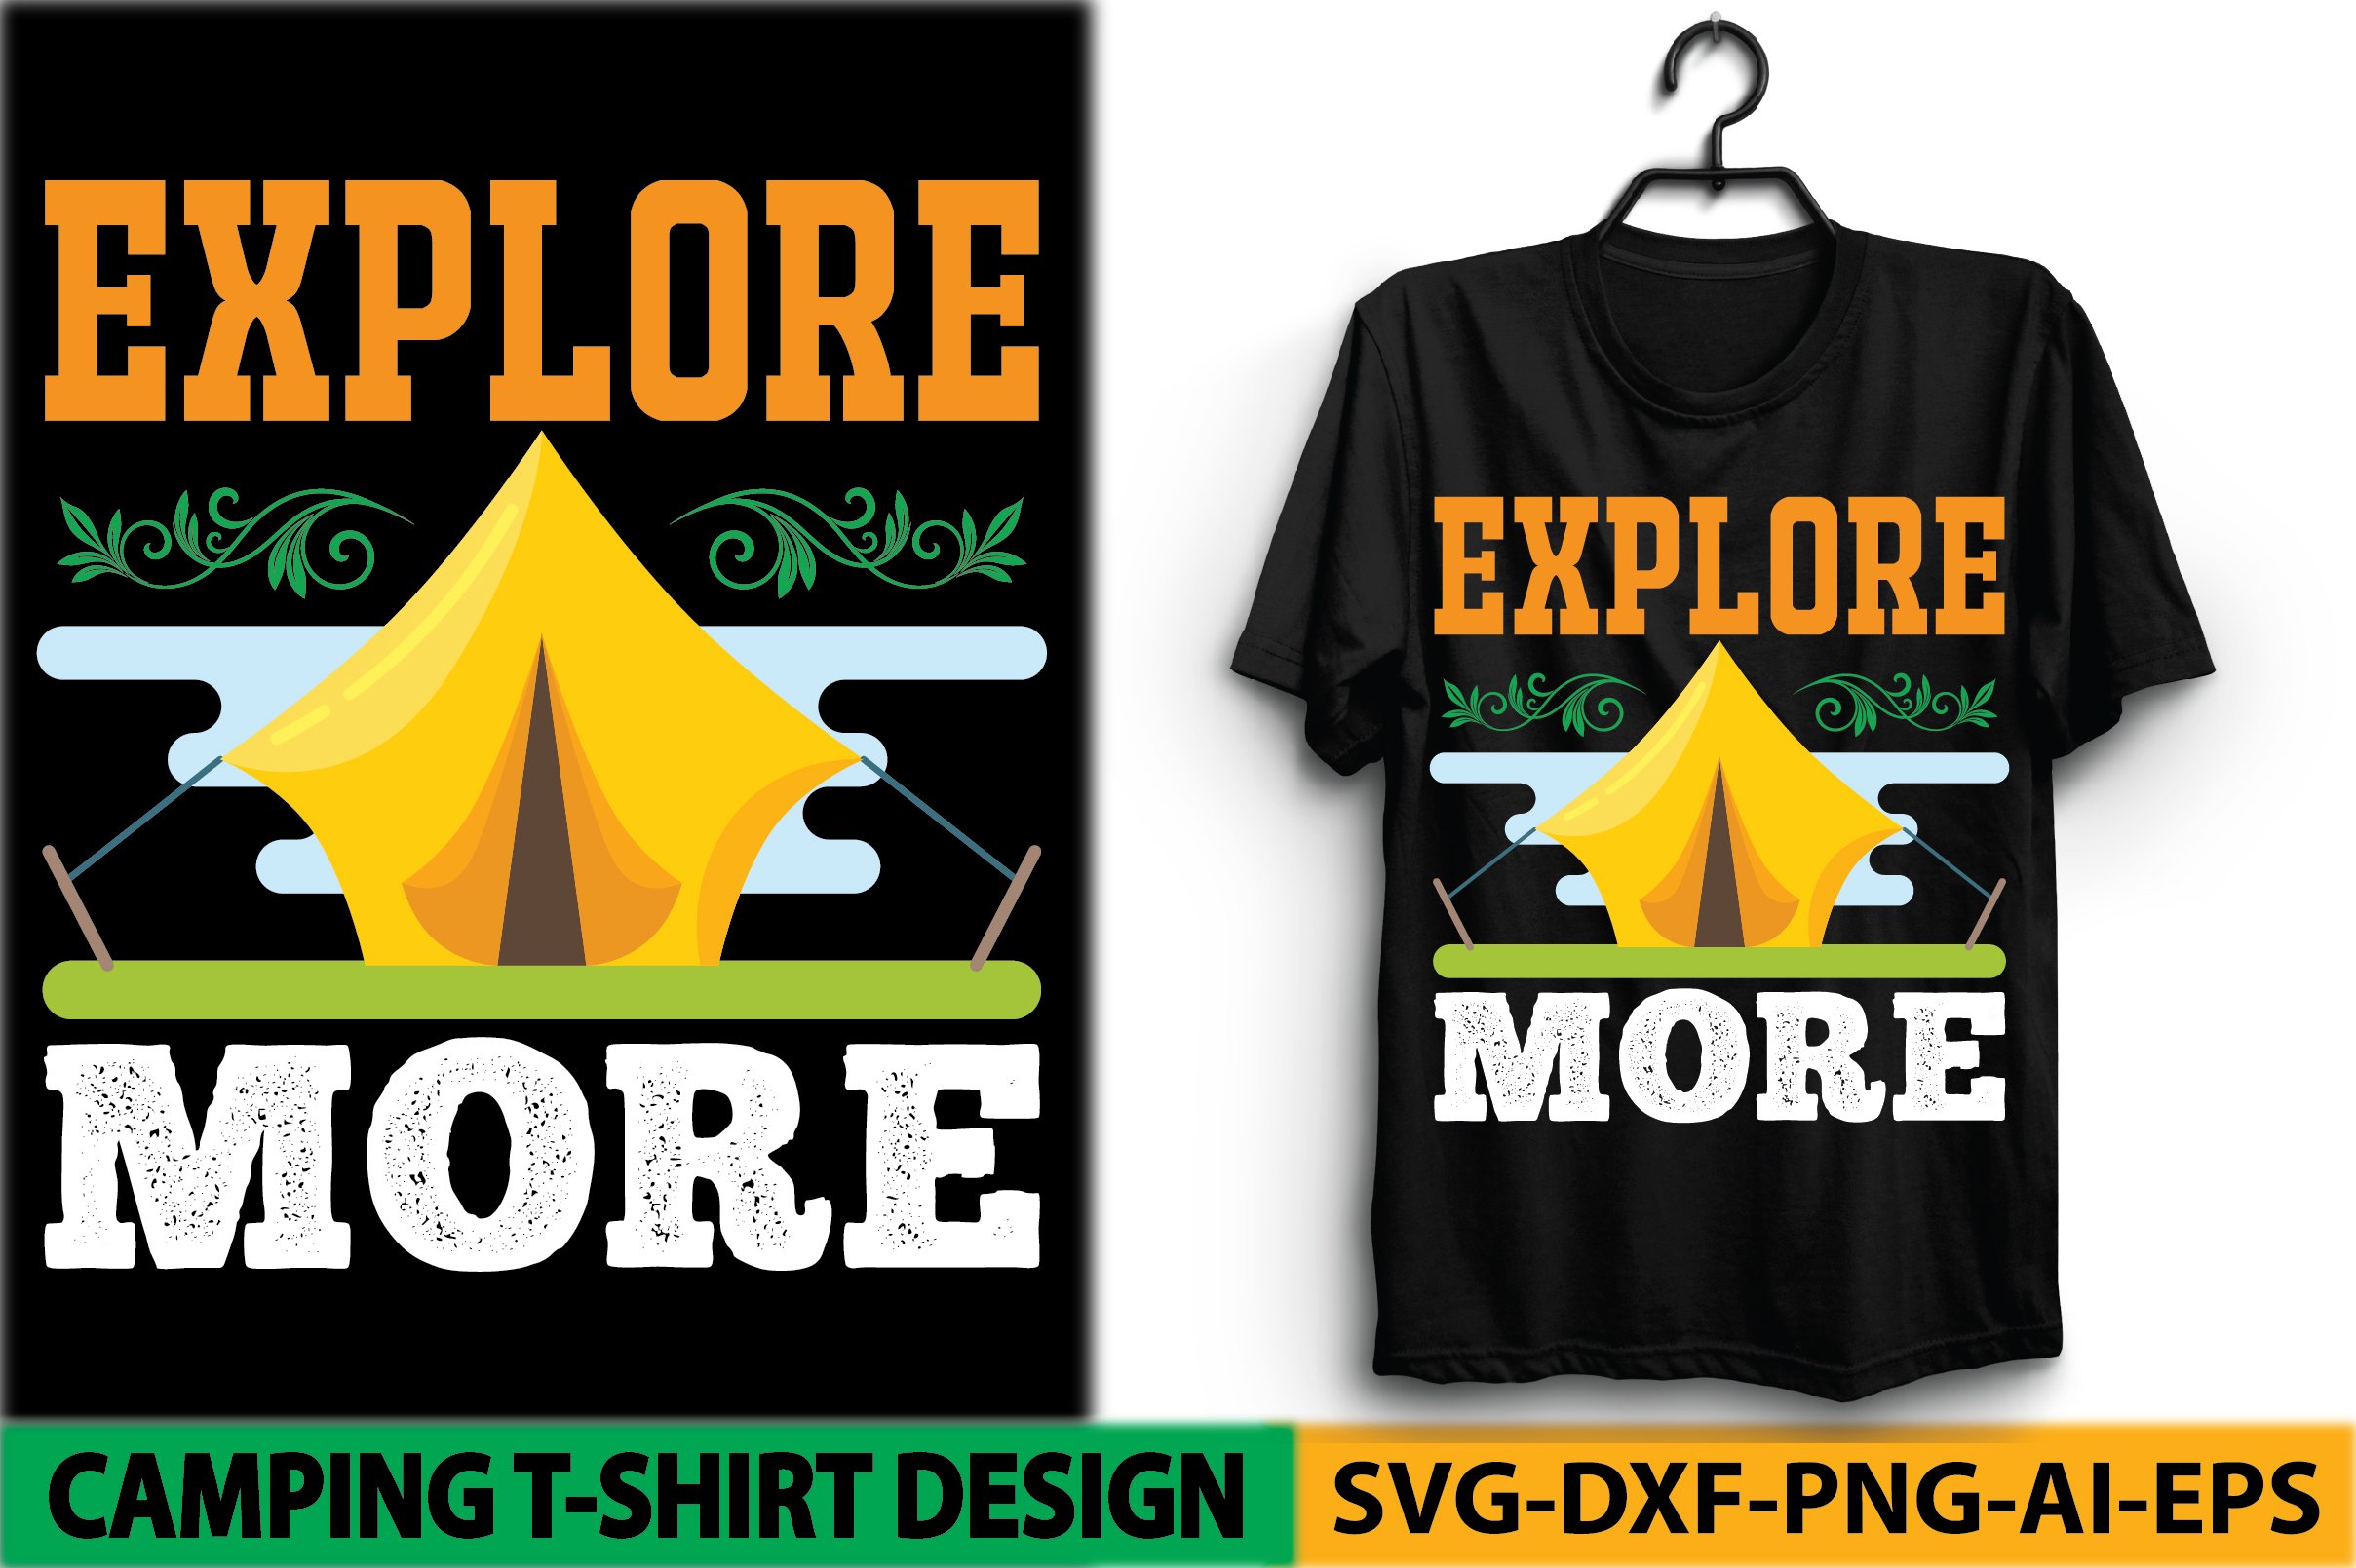 Yellow tent on a black t-shirt with orange font..